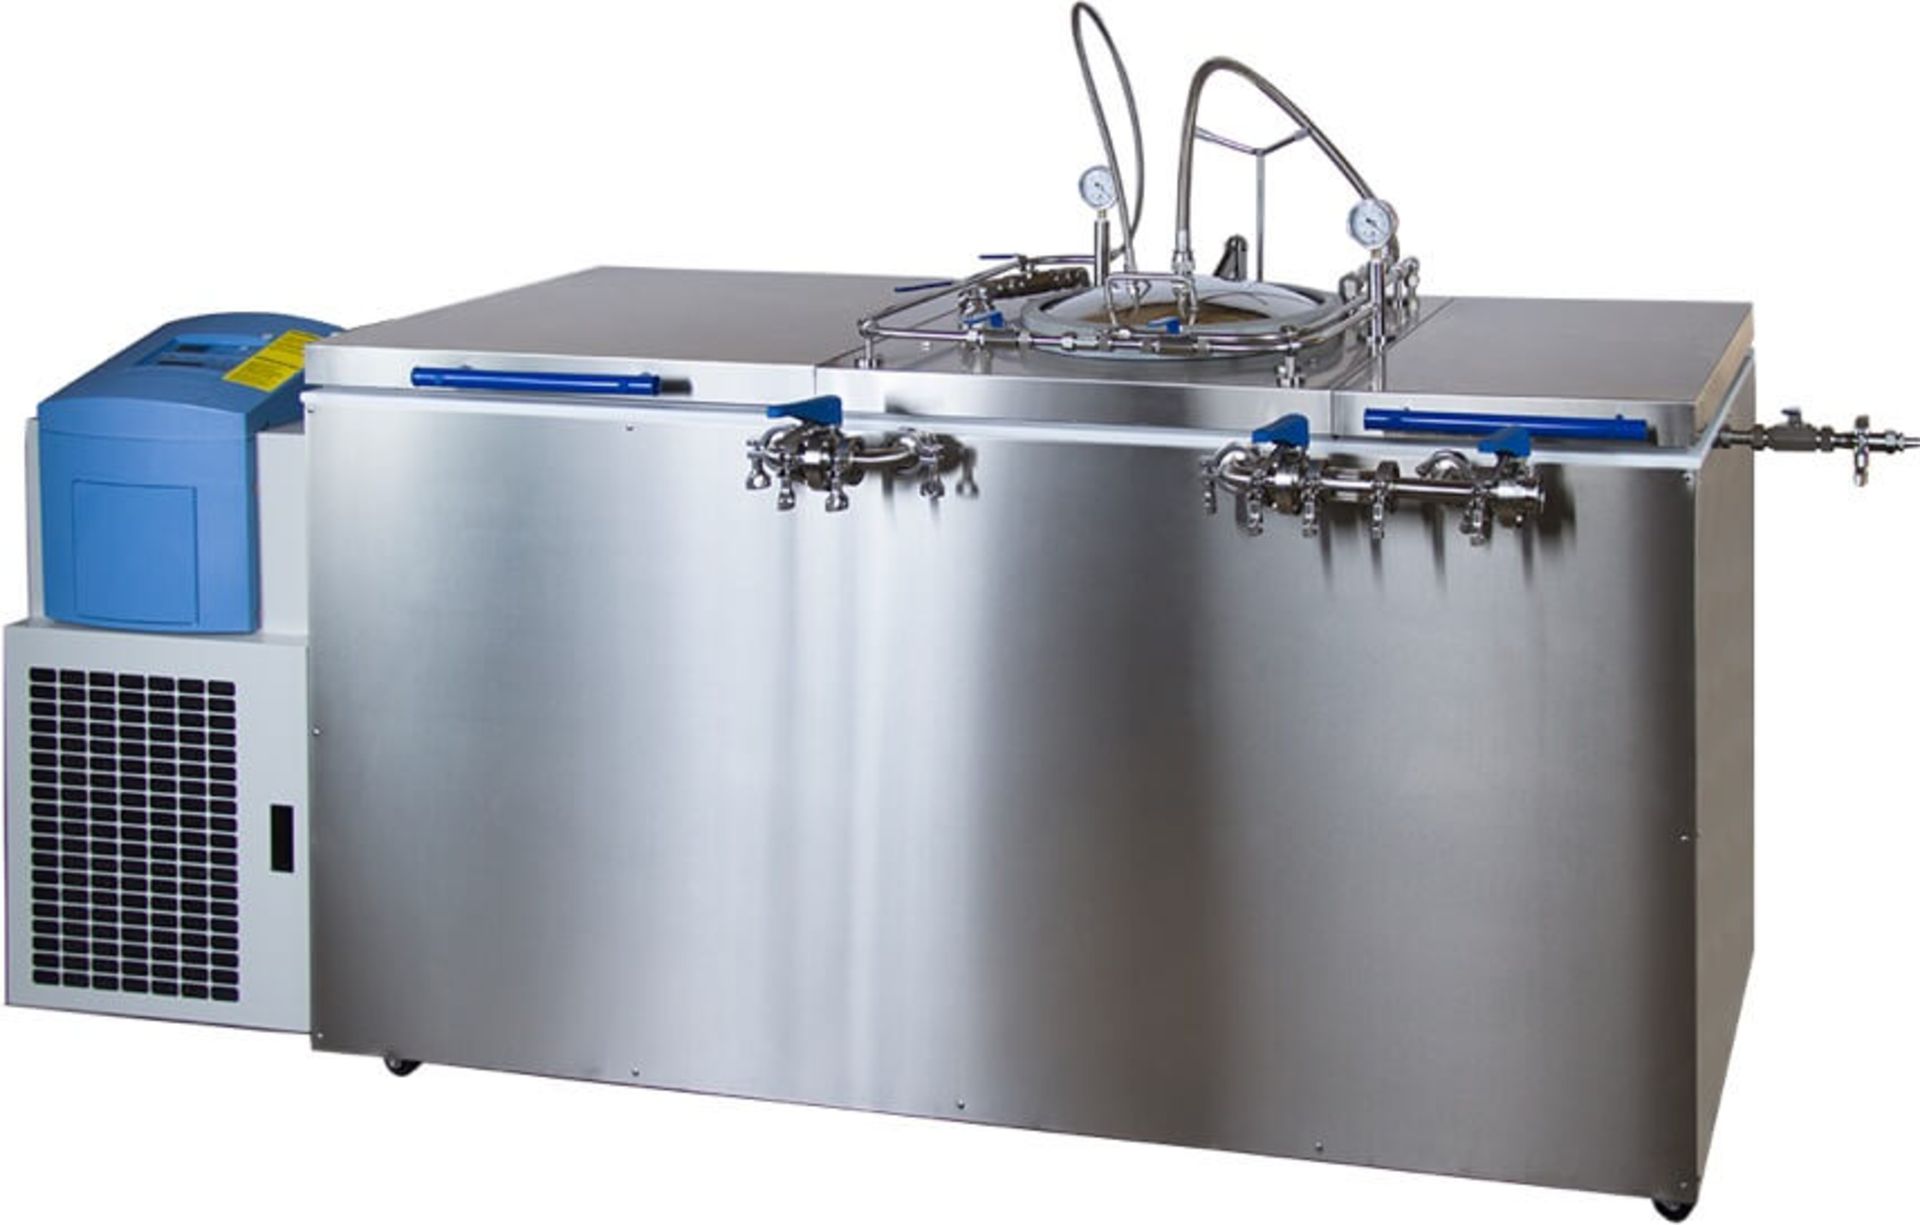 Unused/ Still-In-Crate- Capna Systems Cryo-Ethanol Extractor. Model Ethos 6.